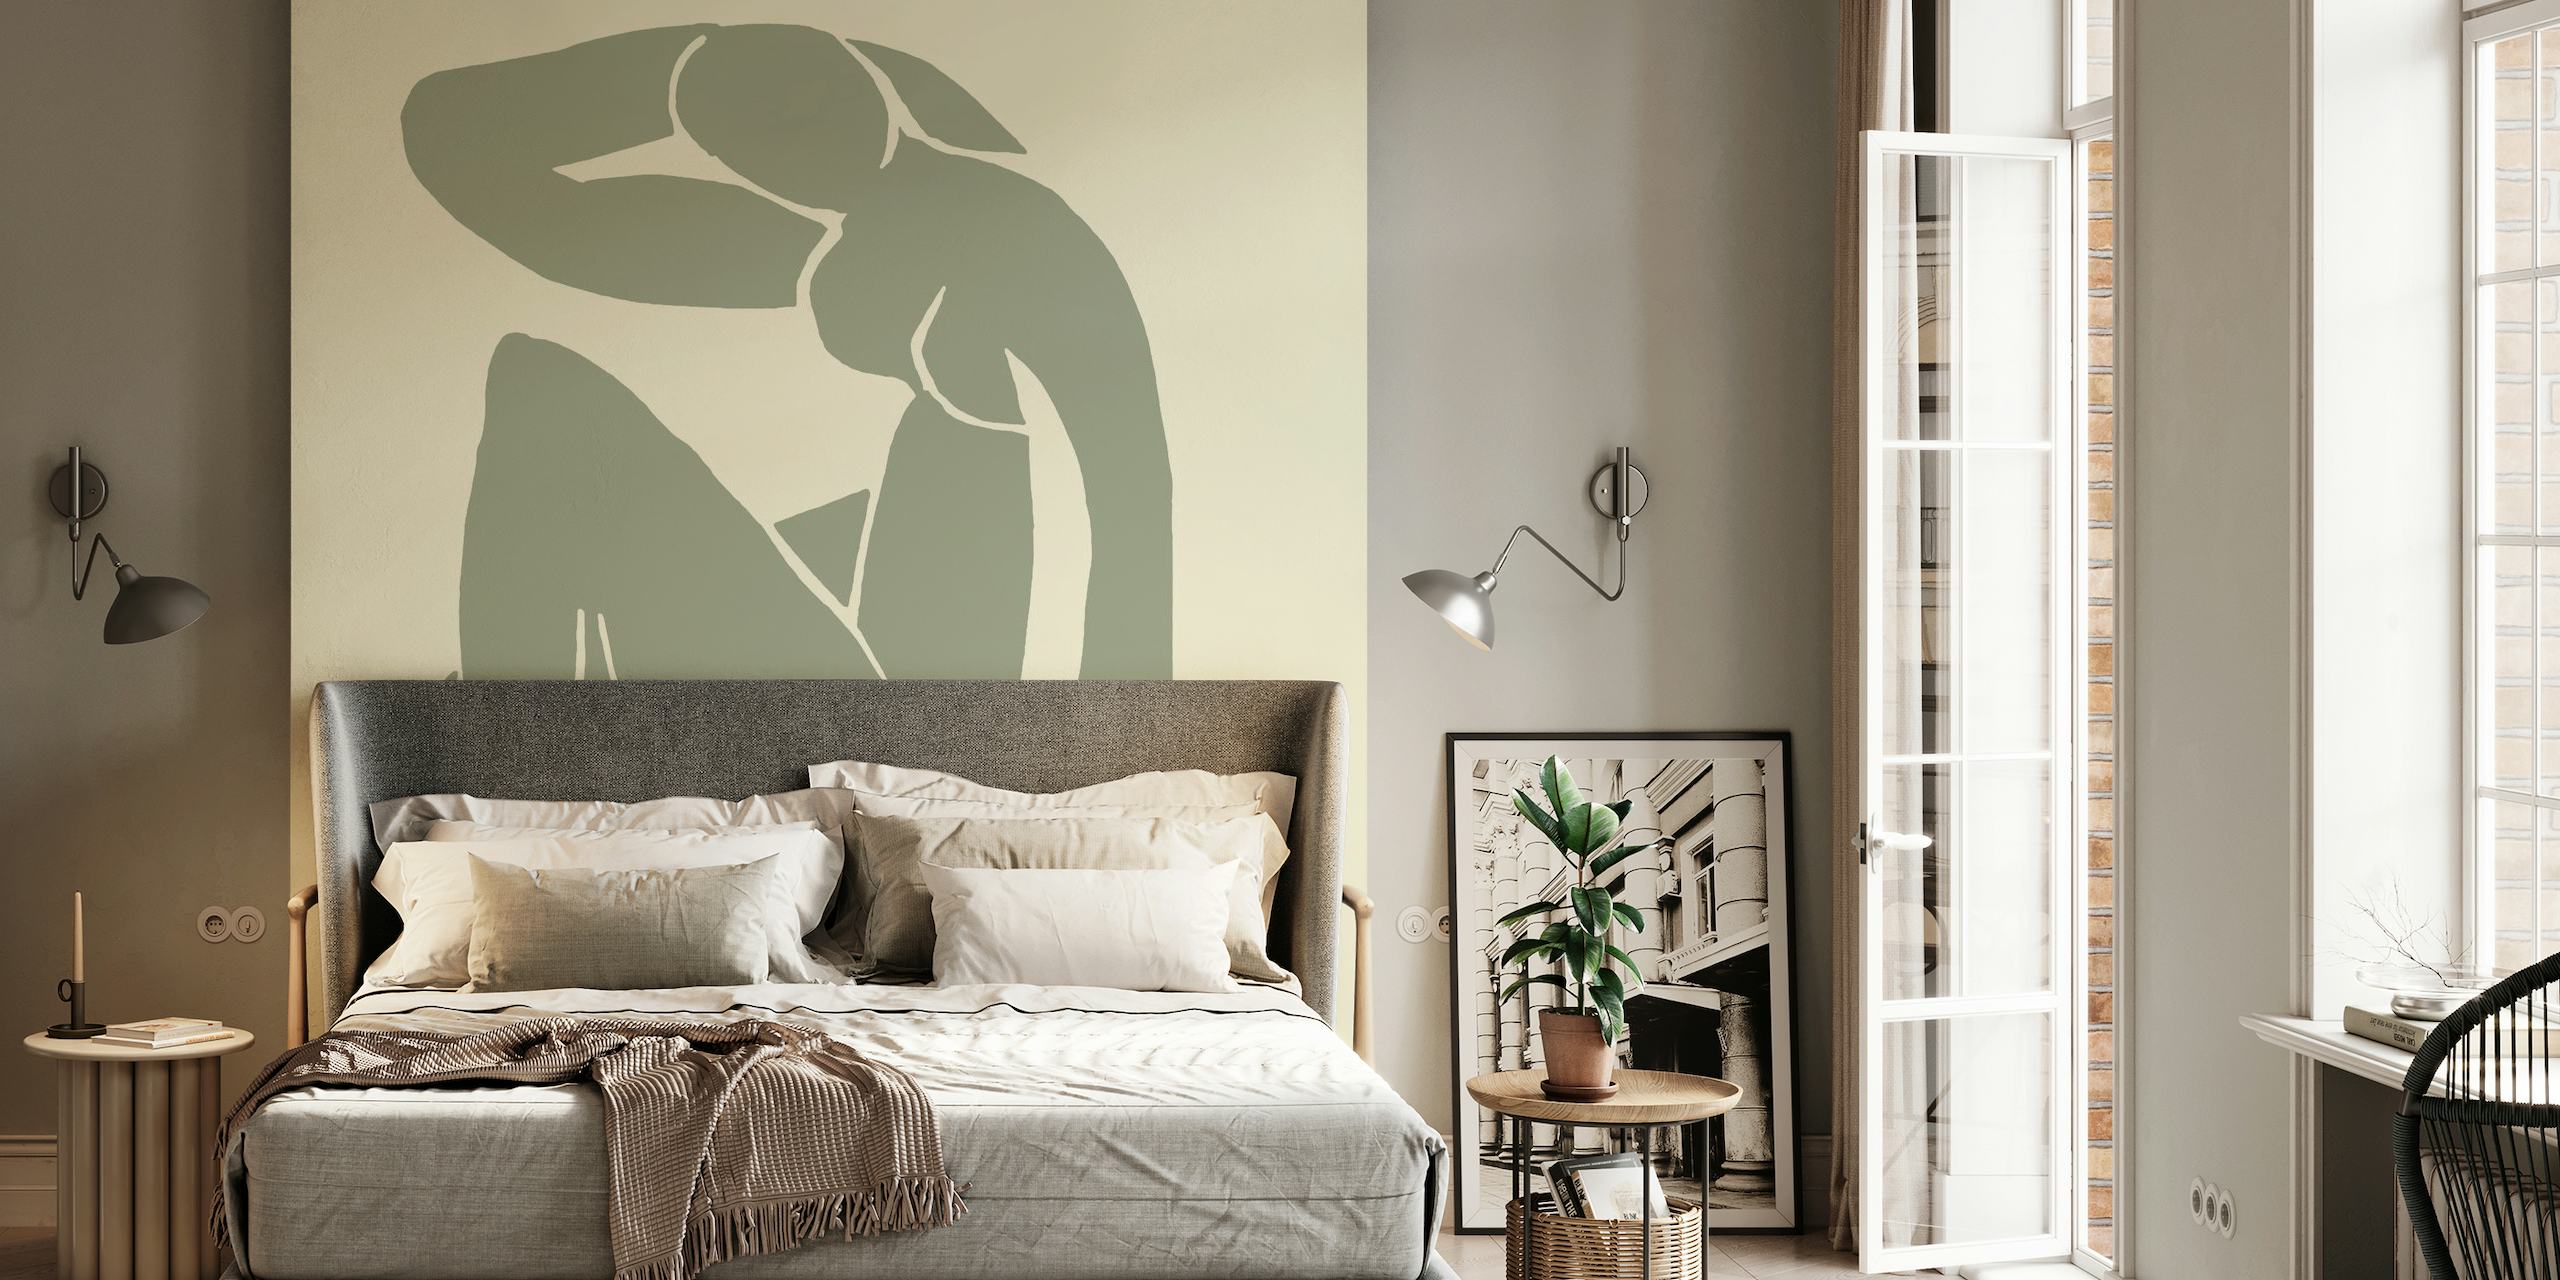 Green Nude Matisse Style wall mural with elegant silhouette